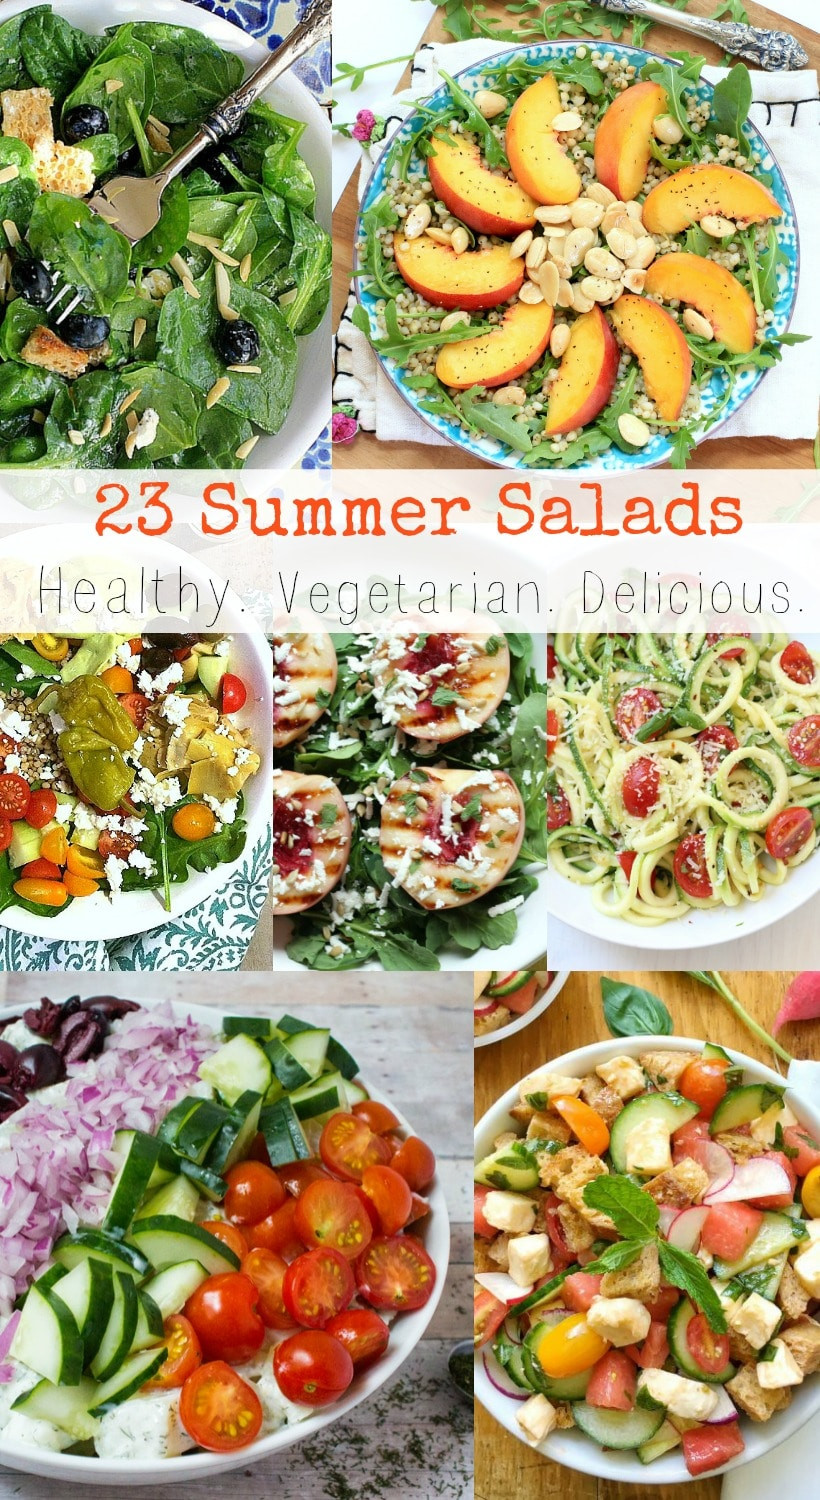 Healthy Summer Salads
 43 Healthy Summer Salads You Need to Eat Right Now